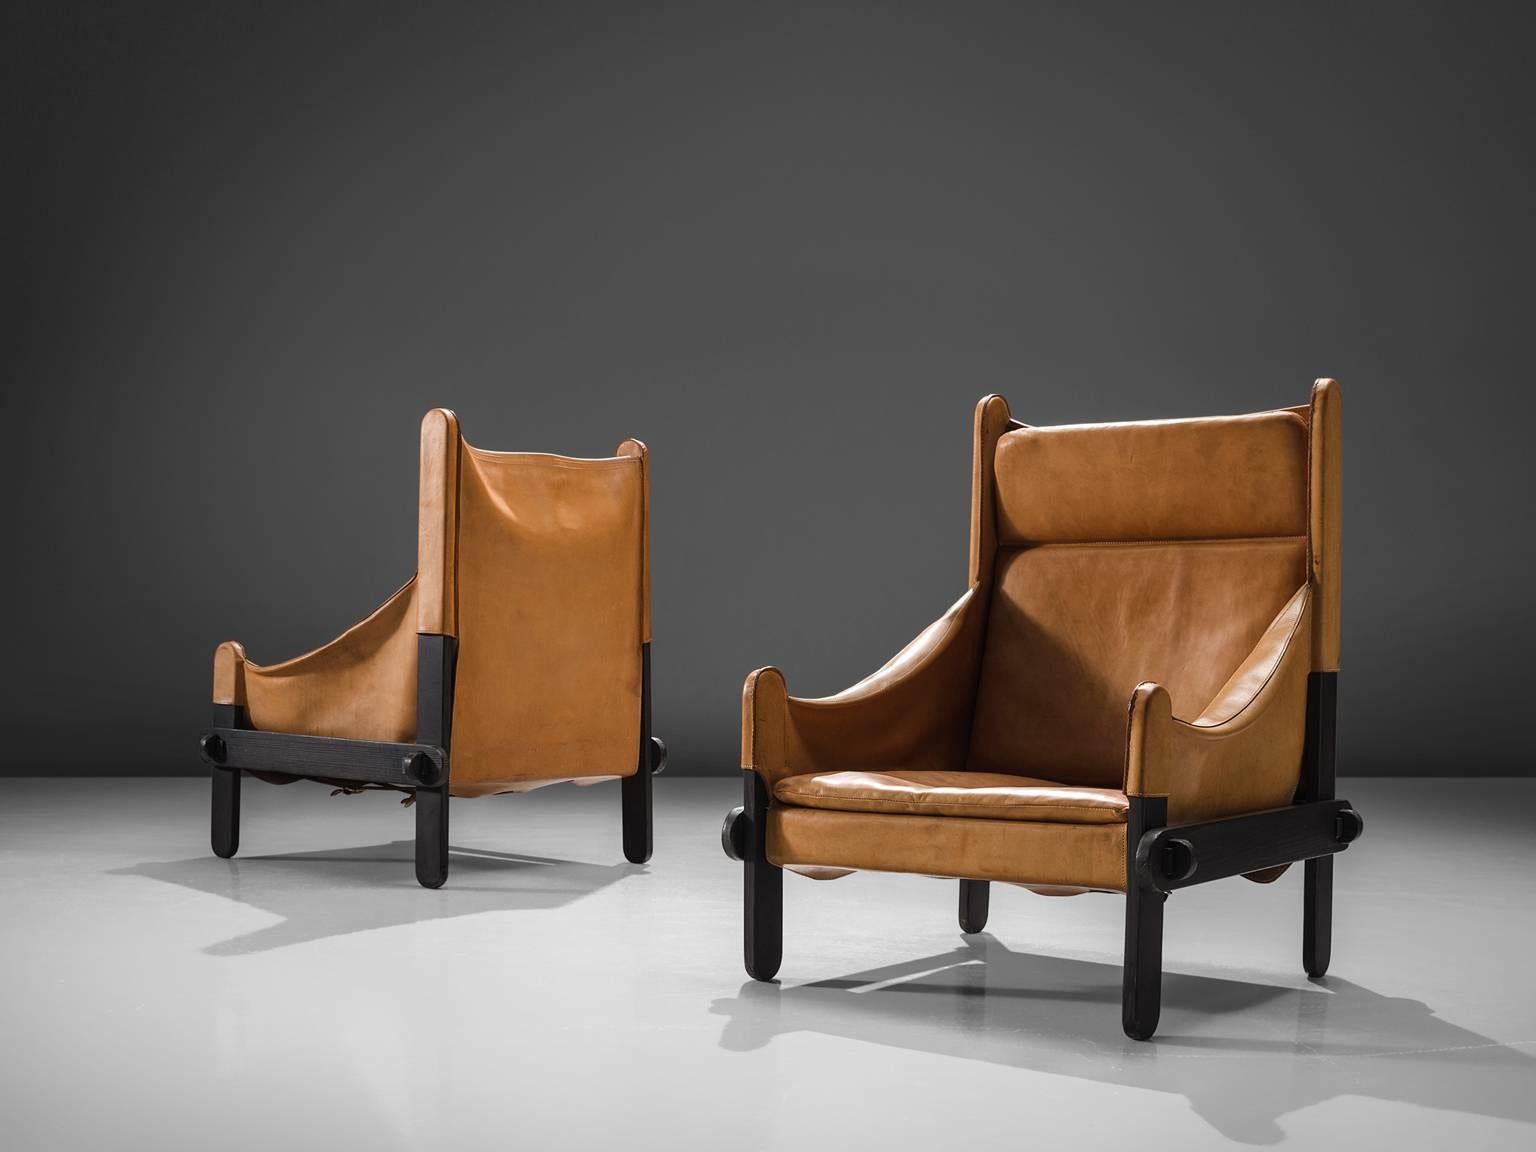 Armchairs, leather, wood, France, 1950s. 

These lounge chairs holds a solid crafted frame with decent wood details/joints. The design is original and rare and features a completely straight high back and sloping armrests that end upwards in a point